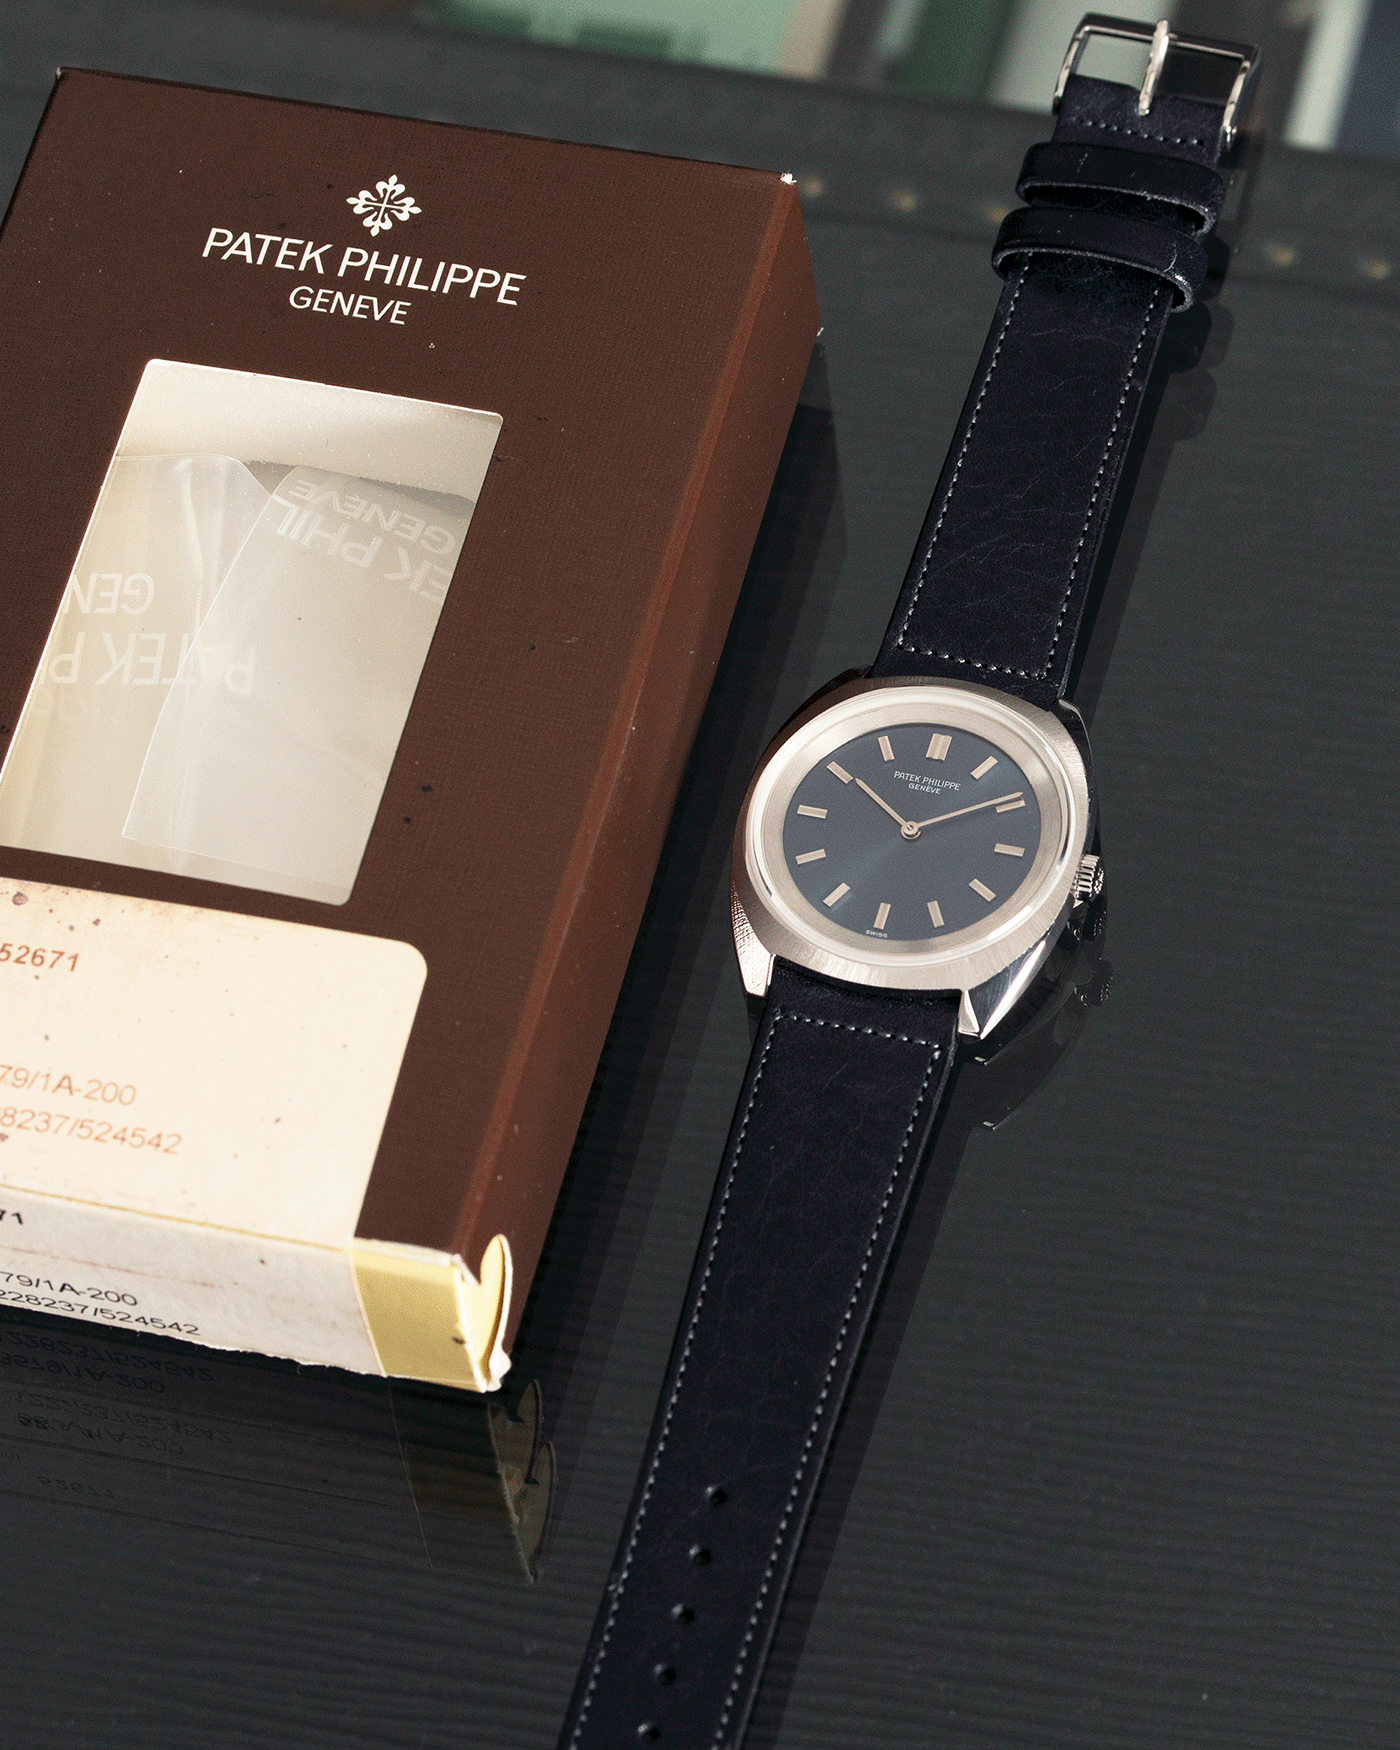 Brand: Patek Philippe Year: 1970s Reference: 3579 Material: Stainless Steel Movement: Cal 23-300 Case Diameter: 33mm Strap: Accurate Form Navy Blue Japanese Calf